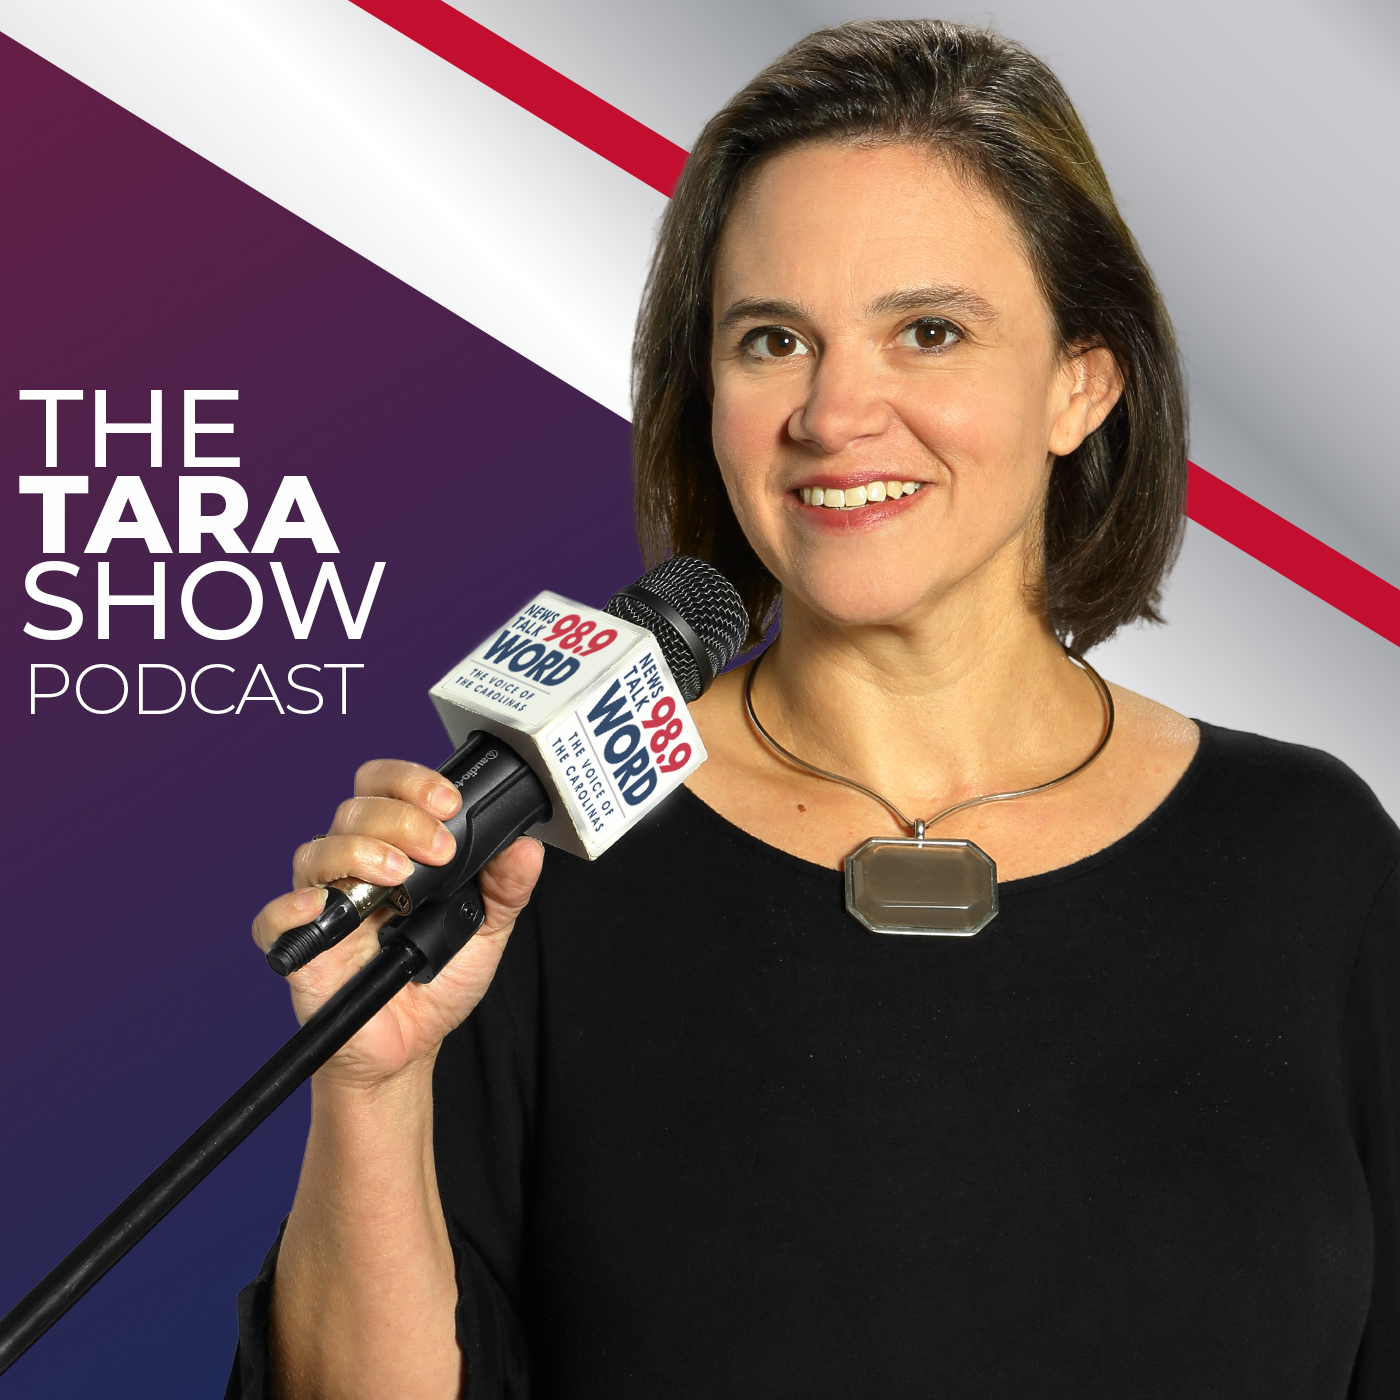 Hour 2 | America’s Most Bipartisan Companies; The Glaring Problem For Democrats; Woke Messaging In Children's Media; South Park And Text Line | 5-27 | The Tara Show